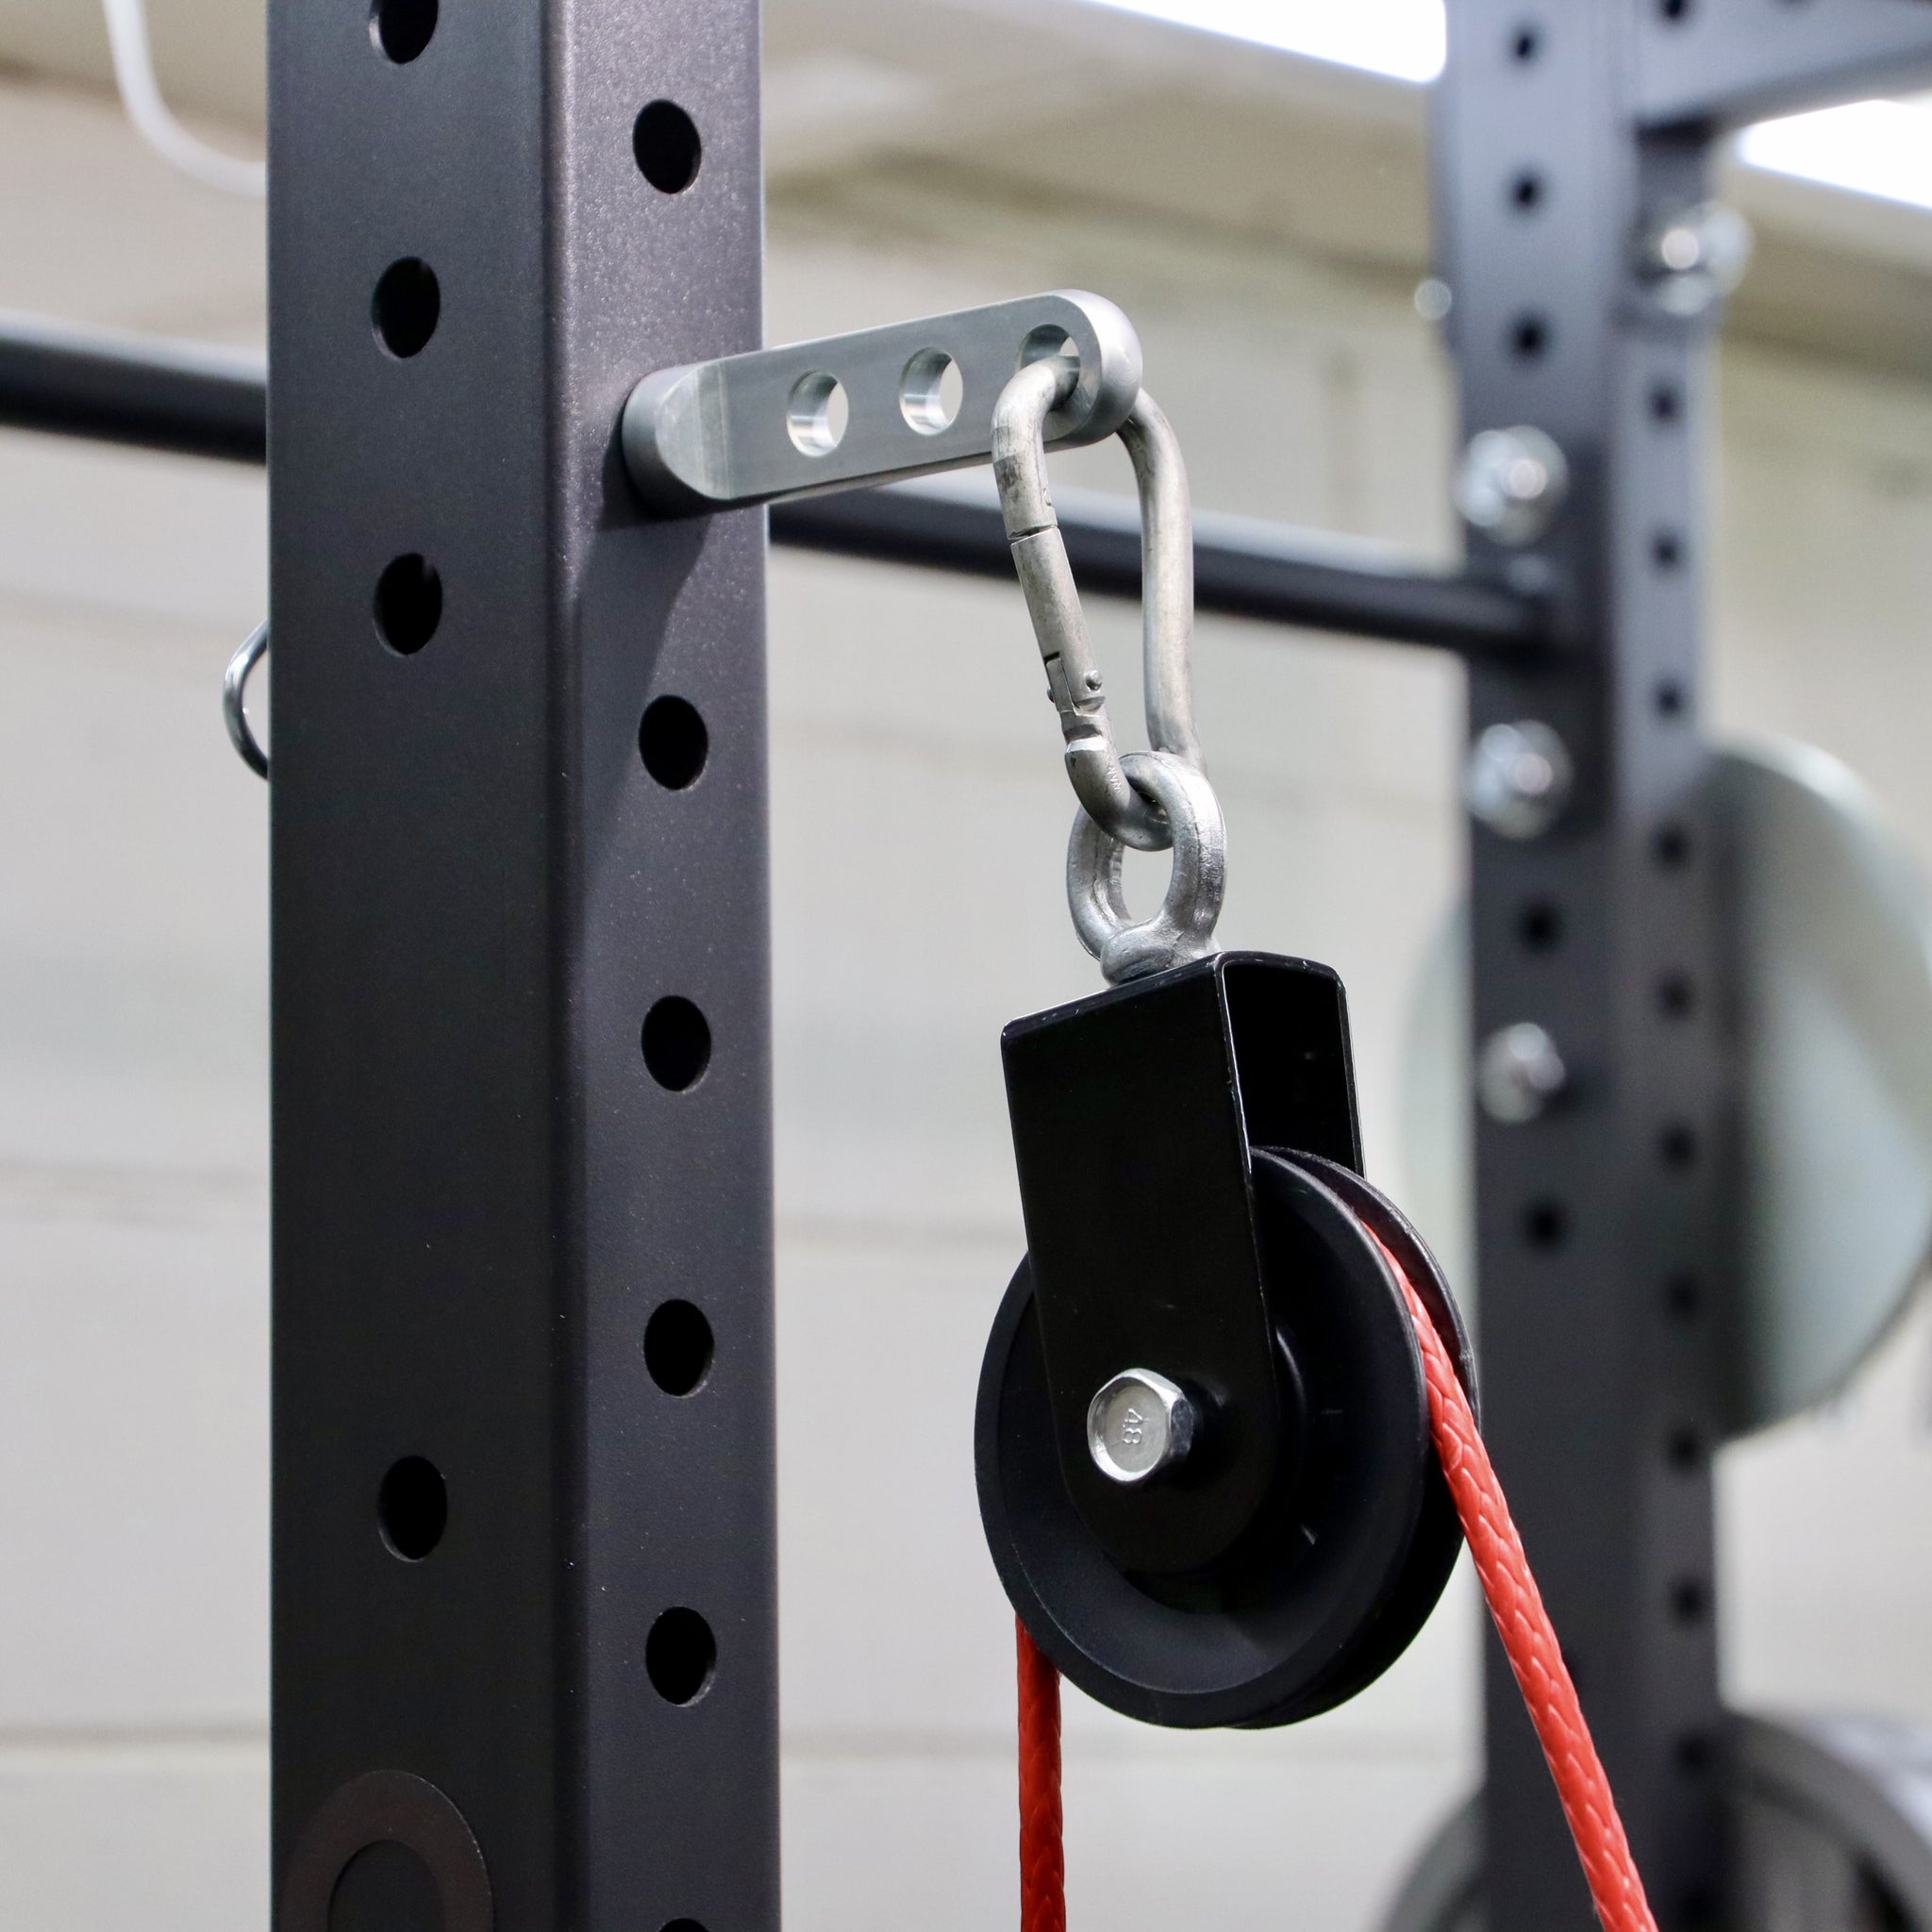  F&F STEEL Power Rack Attachment Pin Adapter Sleeve - 5/8 to 1  - Universal Fitment on Standard 2x2, 3x2, and 3x3 Power Racks, Cages,  & Rigs : Sports & Outdoors